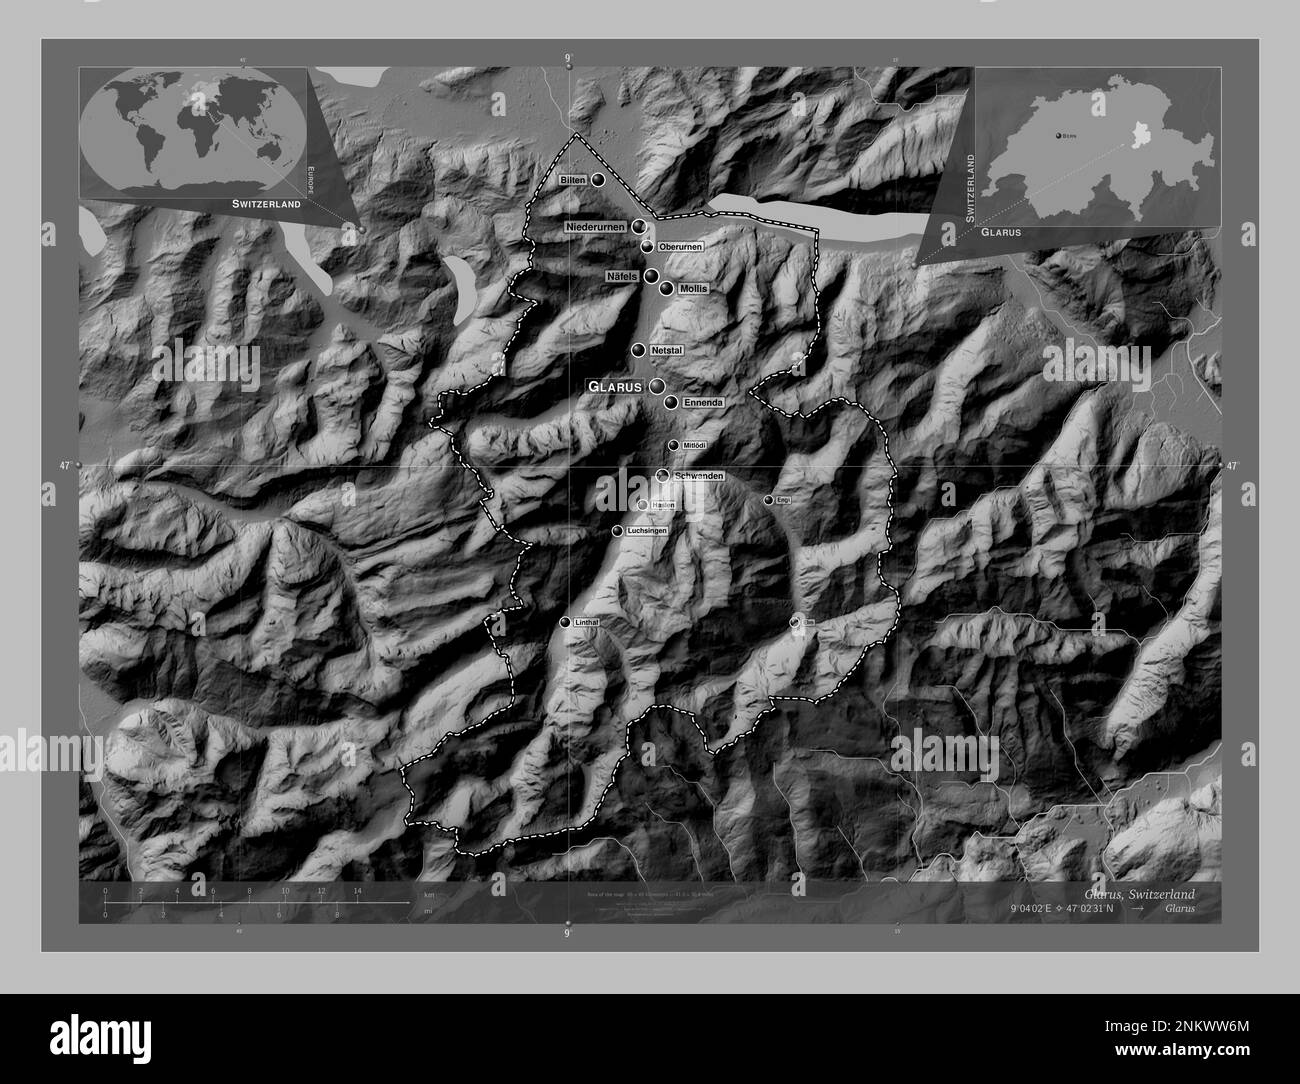 Glarus, canton of Switzerland. Grayscale elevation map with lakes and rivers. Locations and names of major cities of the region. Corner auxiliary loca Stock Photo